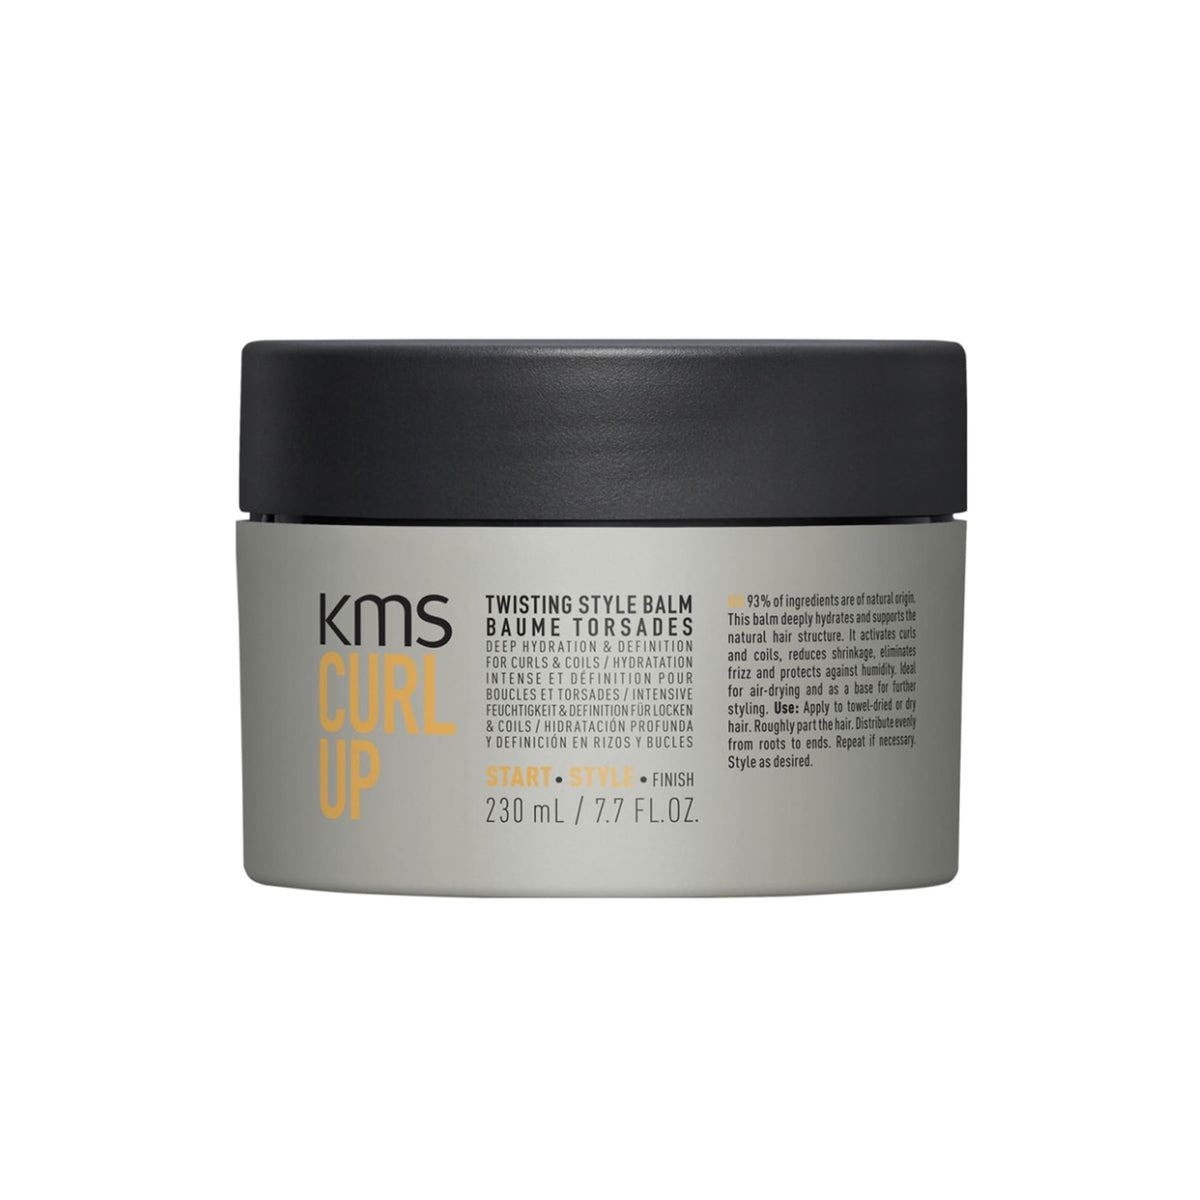 Kms California Curl Up Twisting Style Balm 230ml